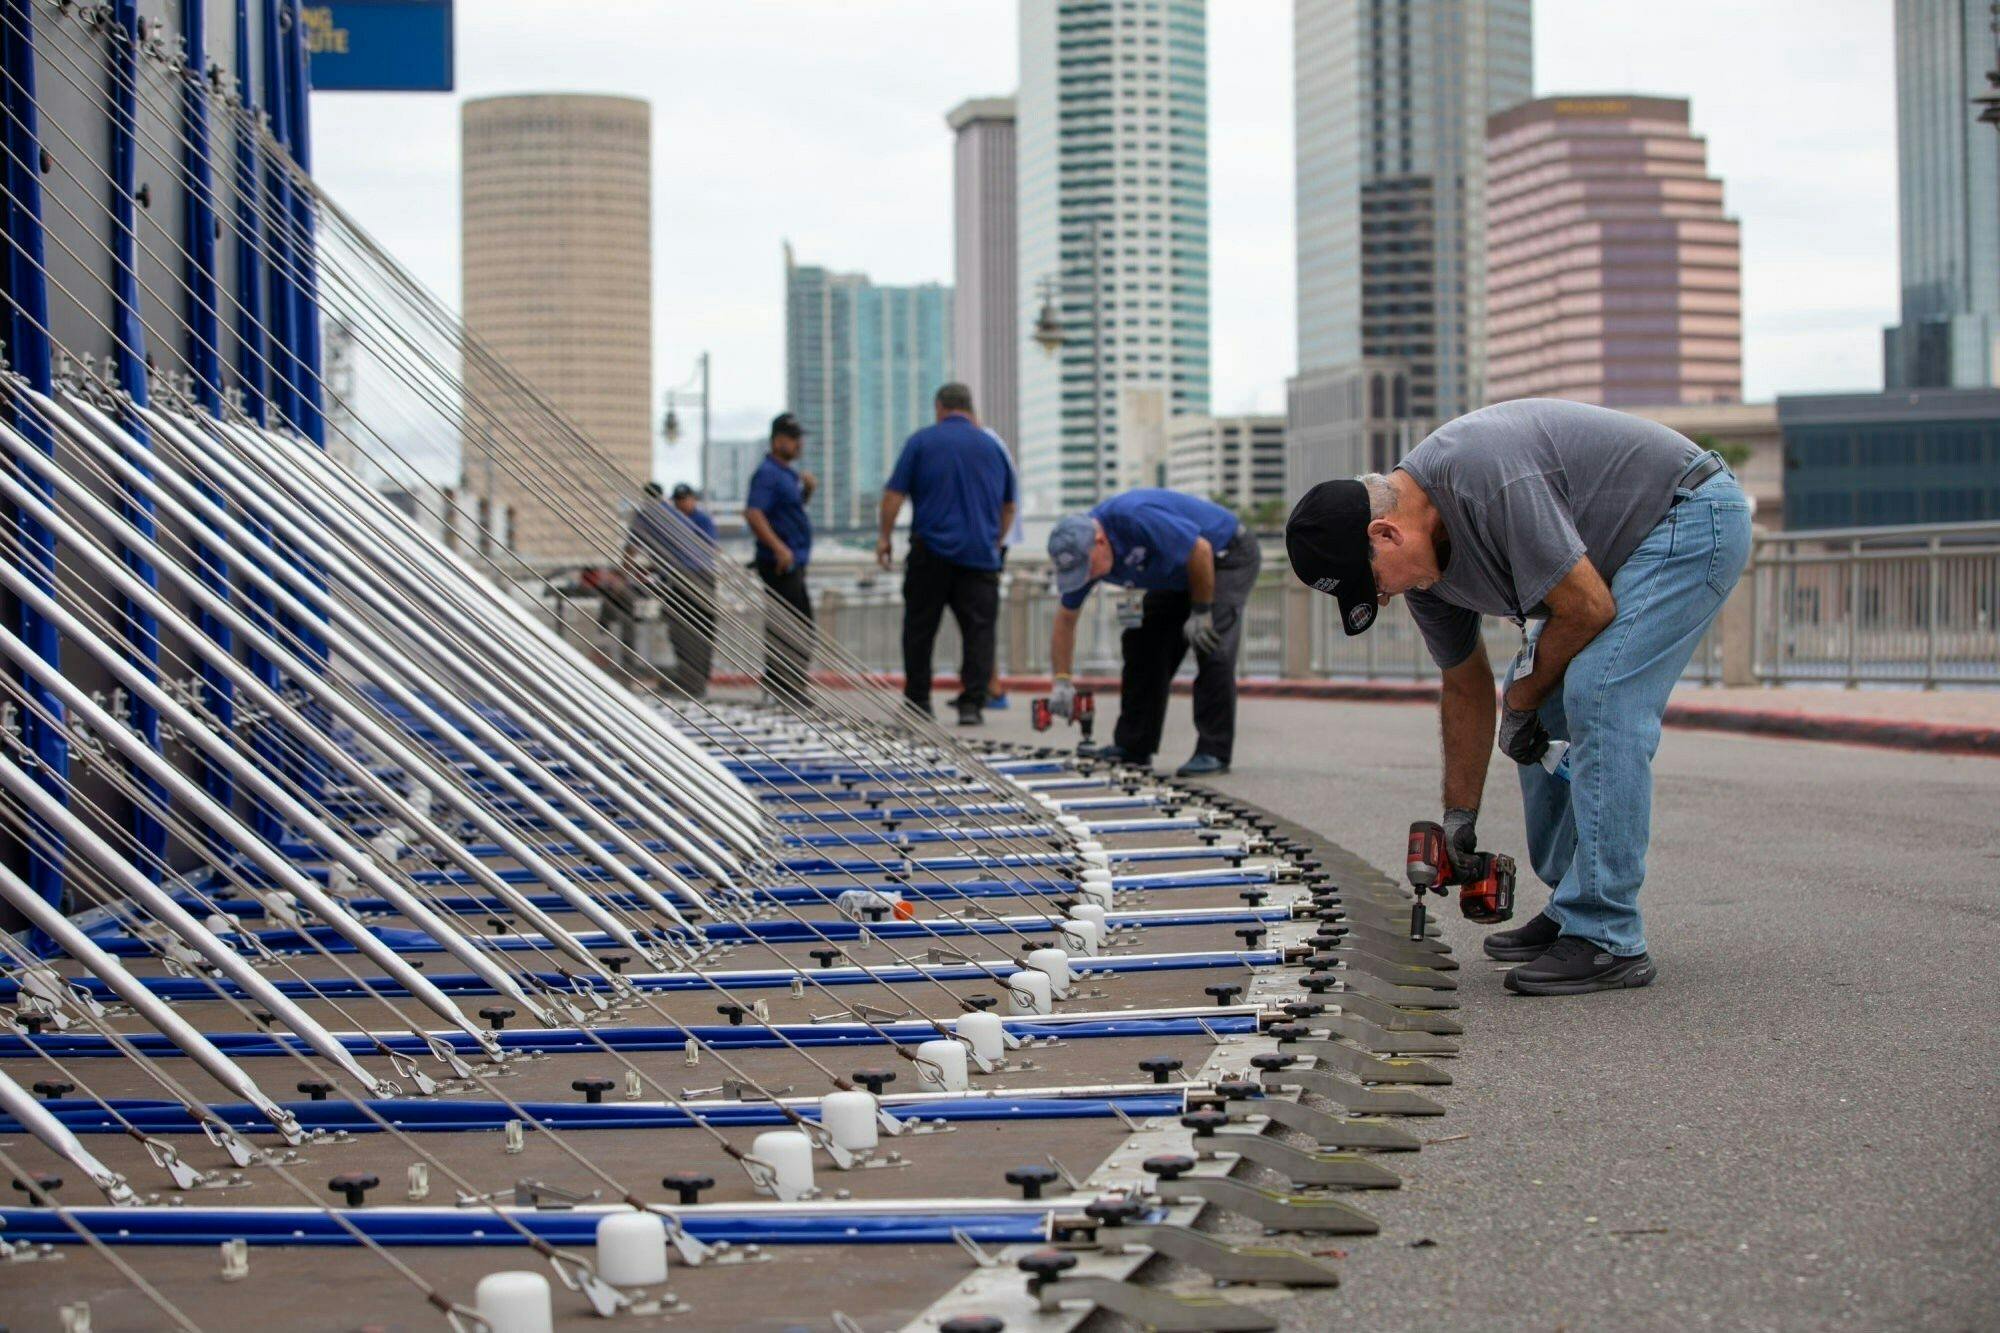 Tampa General Hospitals set up the AquaFence barrier ahead of Hurricane Idalia. Part of the fence will remain up through October. (Photo: Tampa General Hospital)